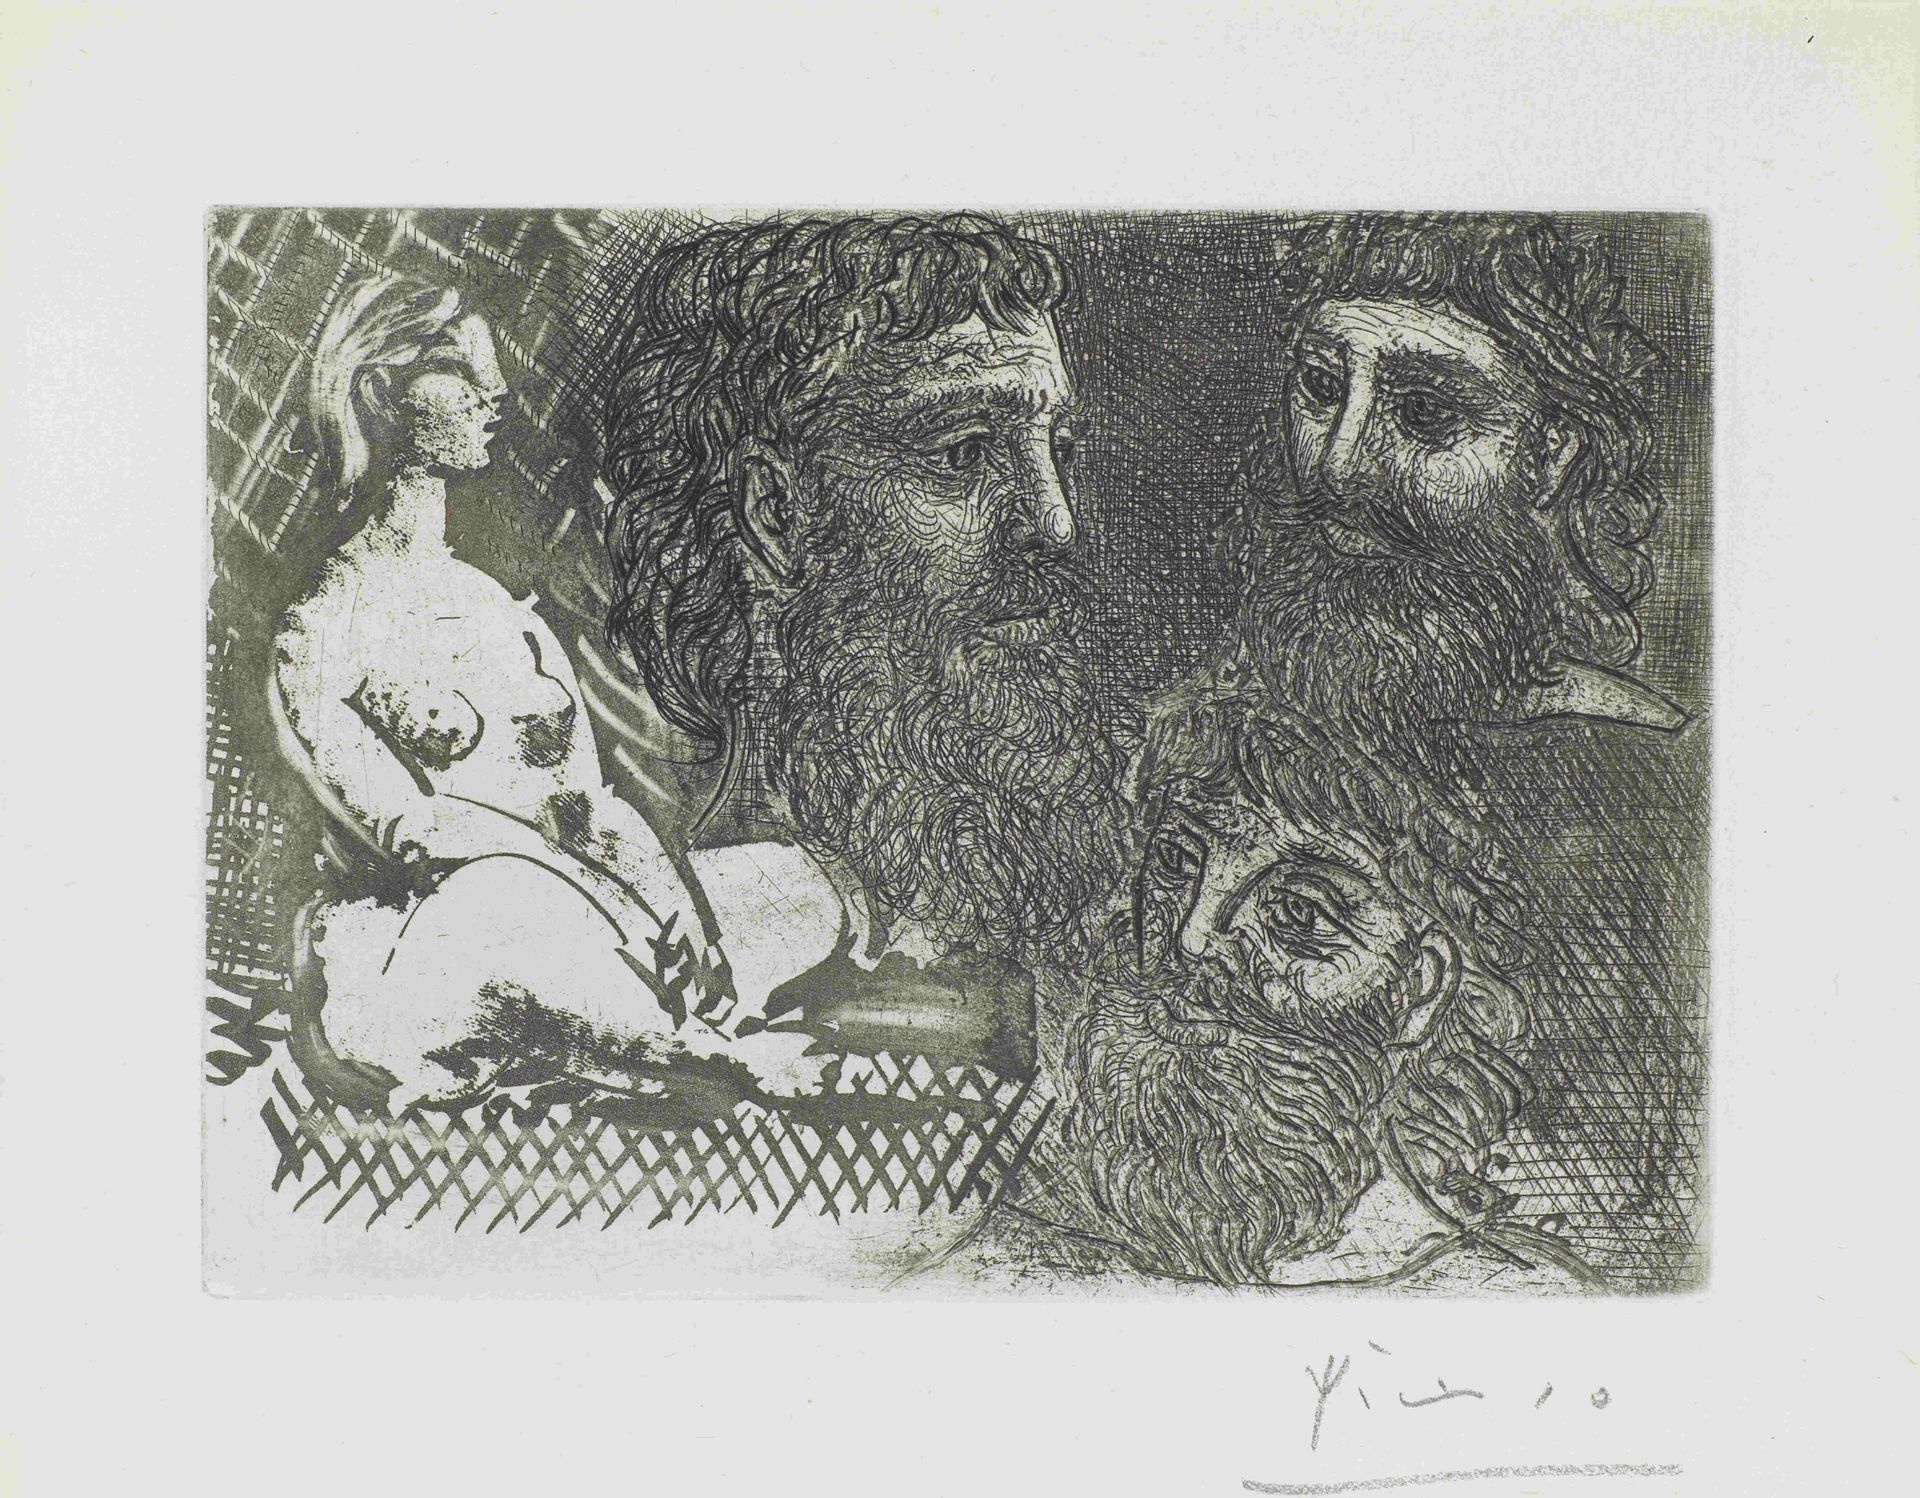 Pablo PICASSO, Femme assise et t&#234;tes barbues, from La Suite Vollard, 1934 signed in pencil ...